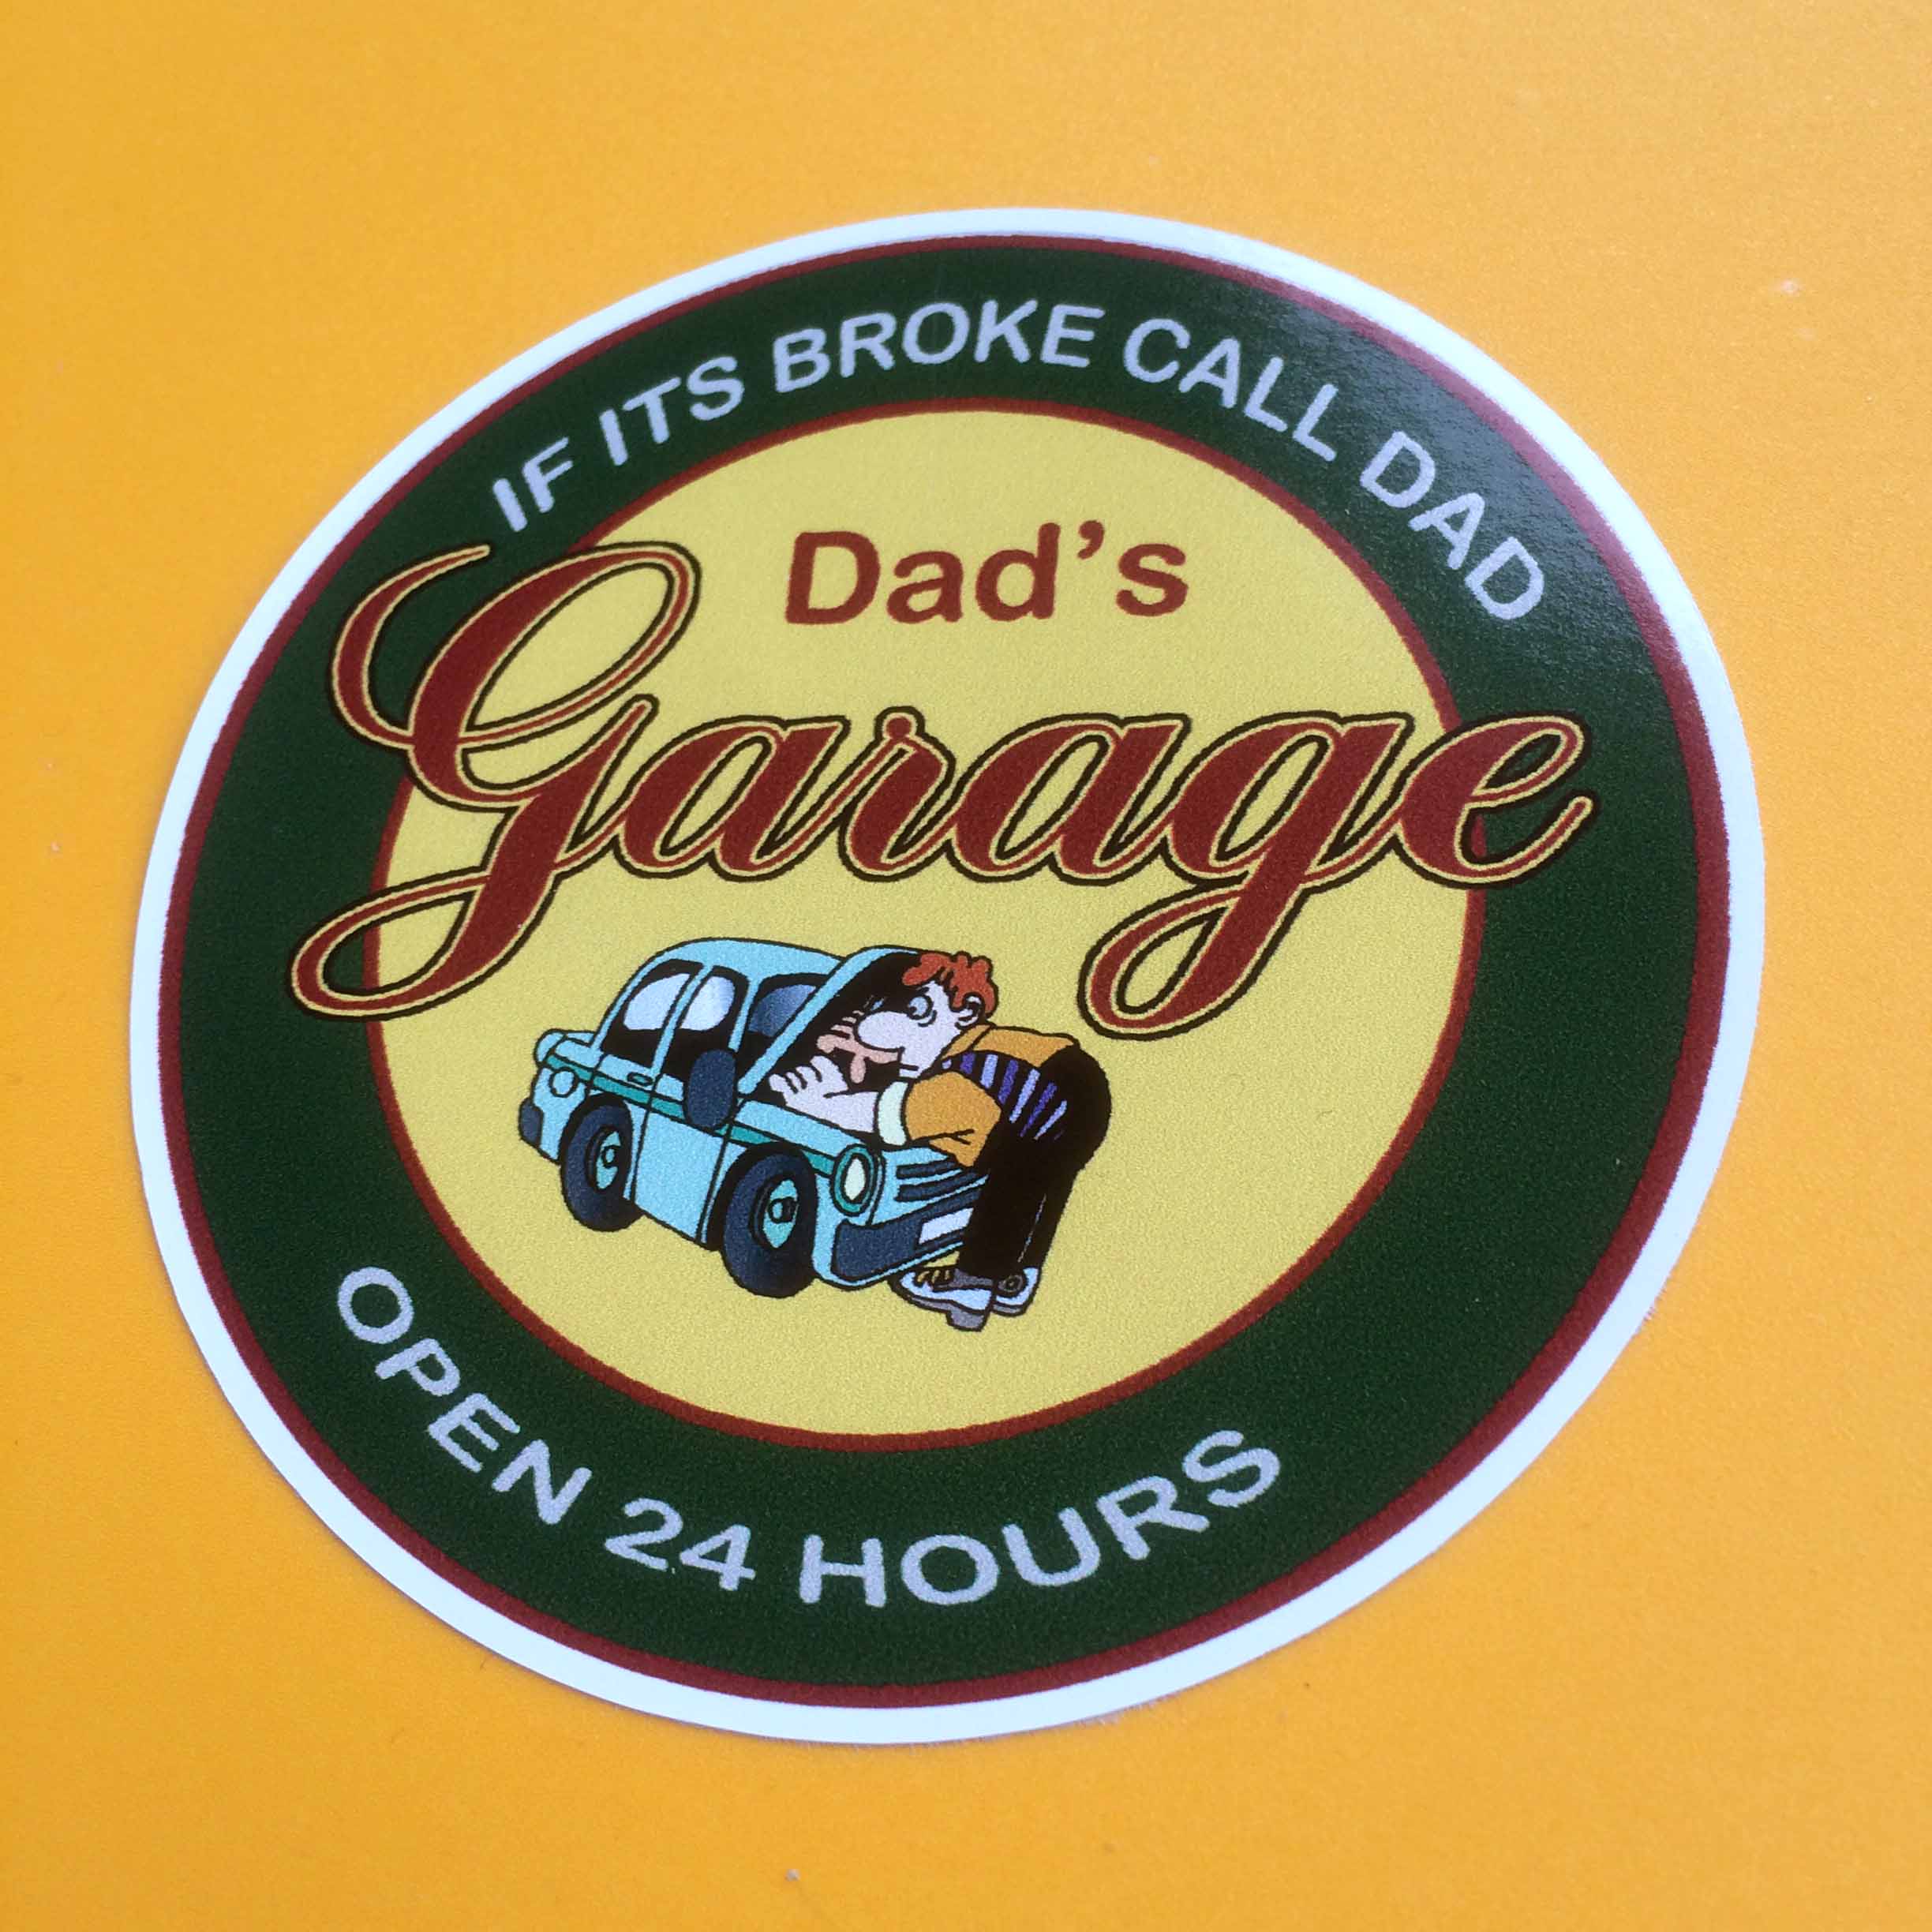 DAD'S GARAGE STICKER. Dad's Garage in burgundy lettering and a cartoon character dressed in shirt, tie and trousers working under the bonnet of a blue car on a yellow circular sticker. If it's broke call dad open 24 hours in white lettering surrounds this on a green border.